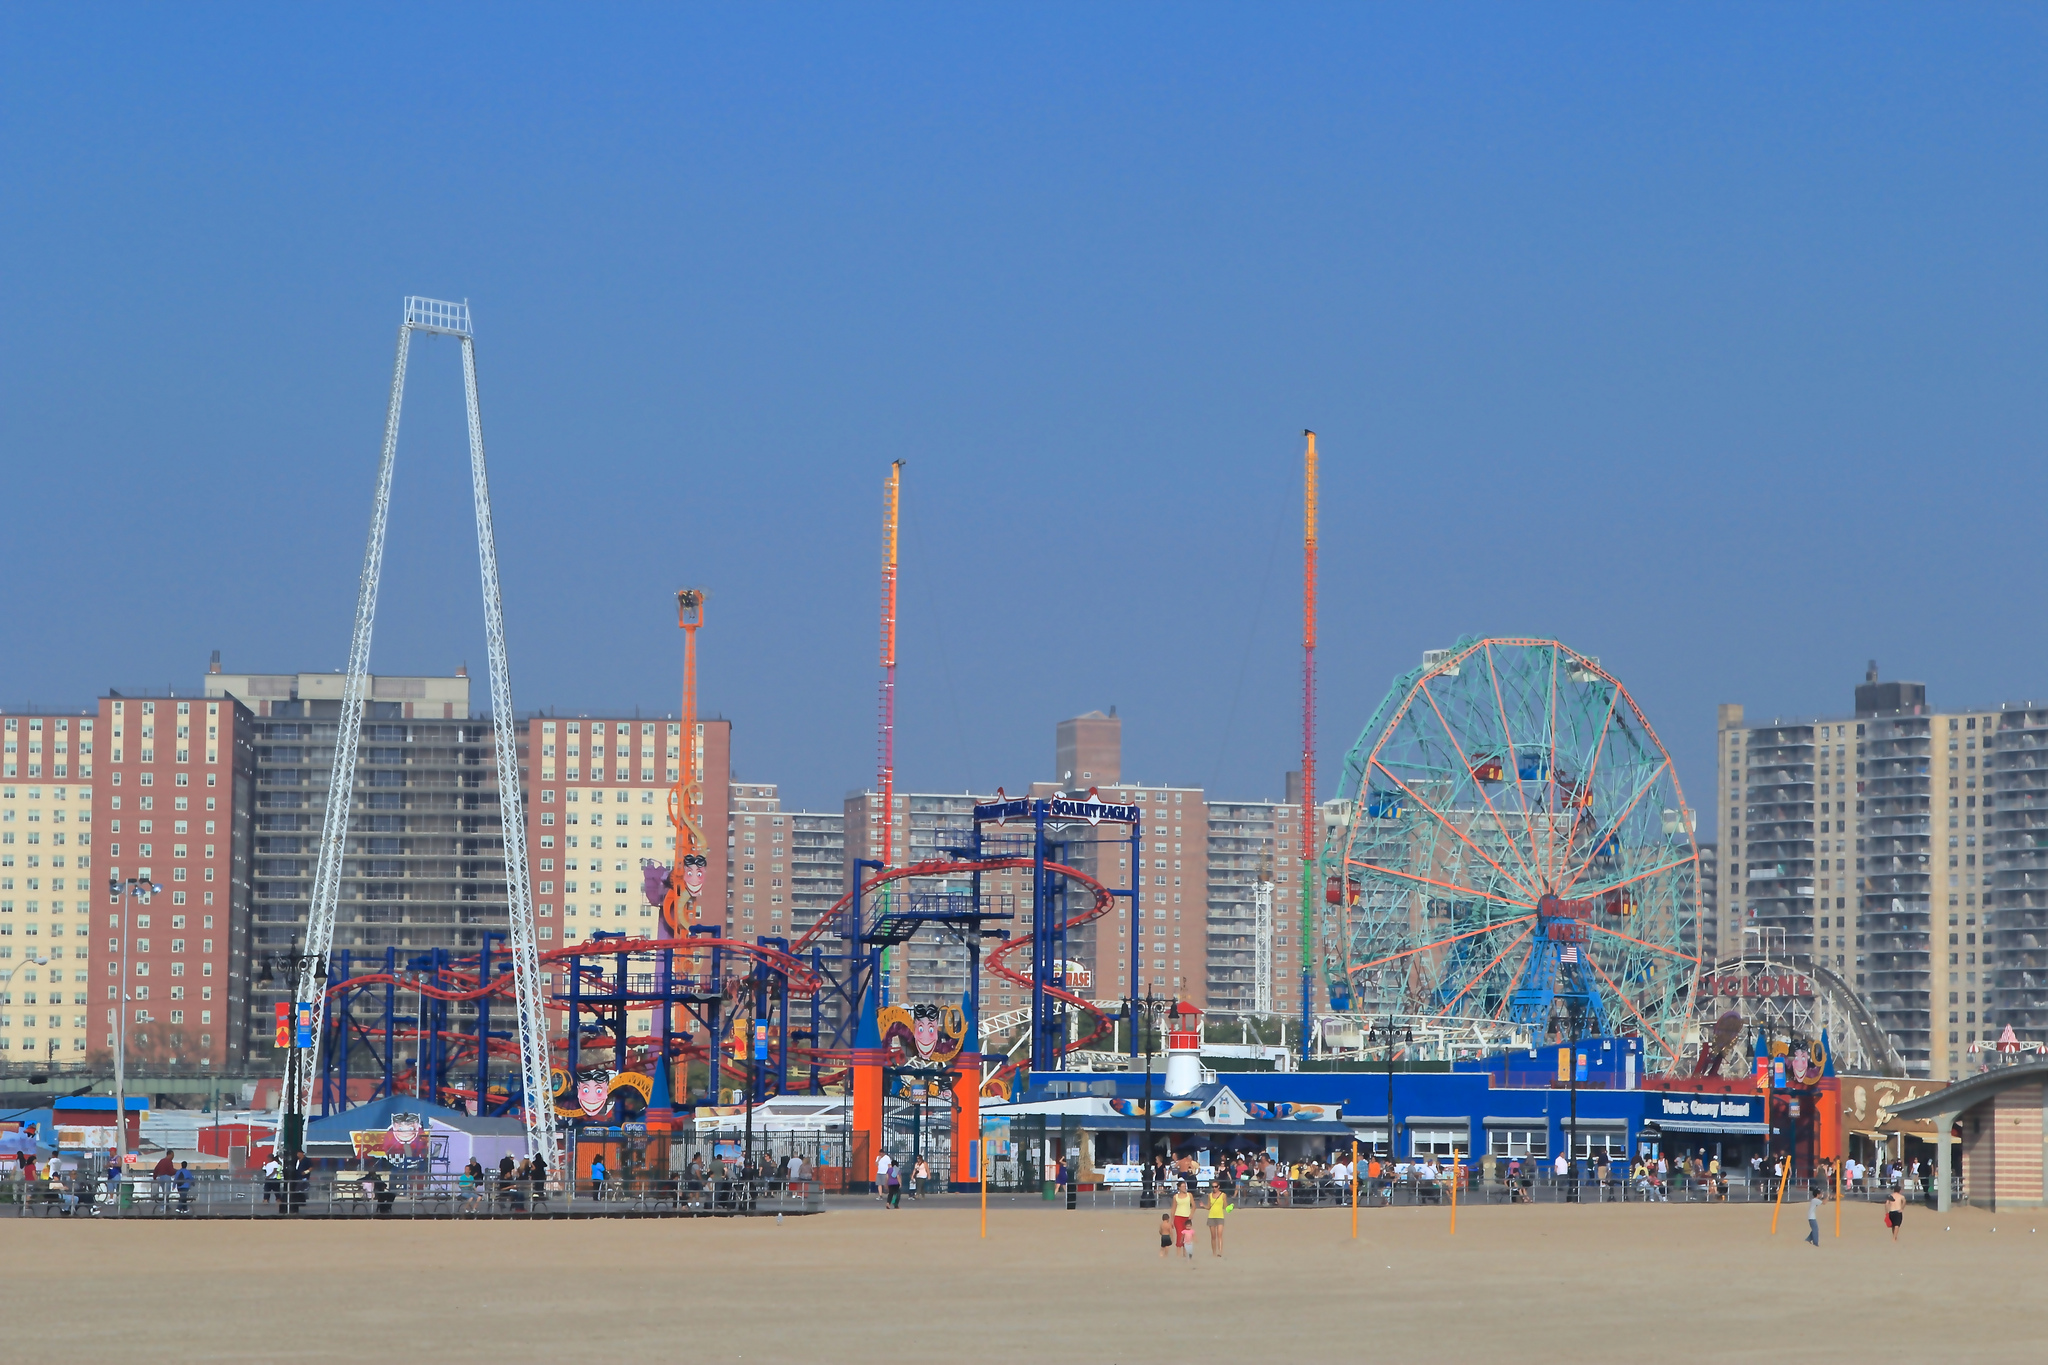 The City Looks To Enhance Coney Island Amusement Park With New Rides